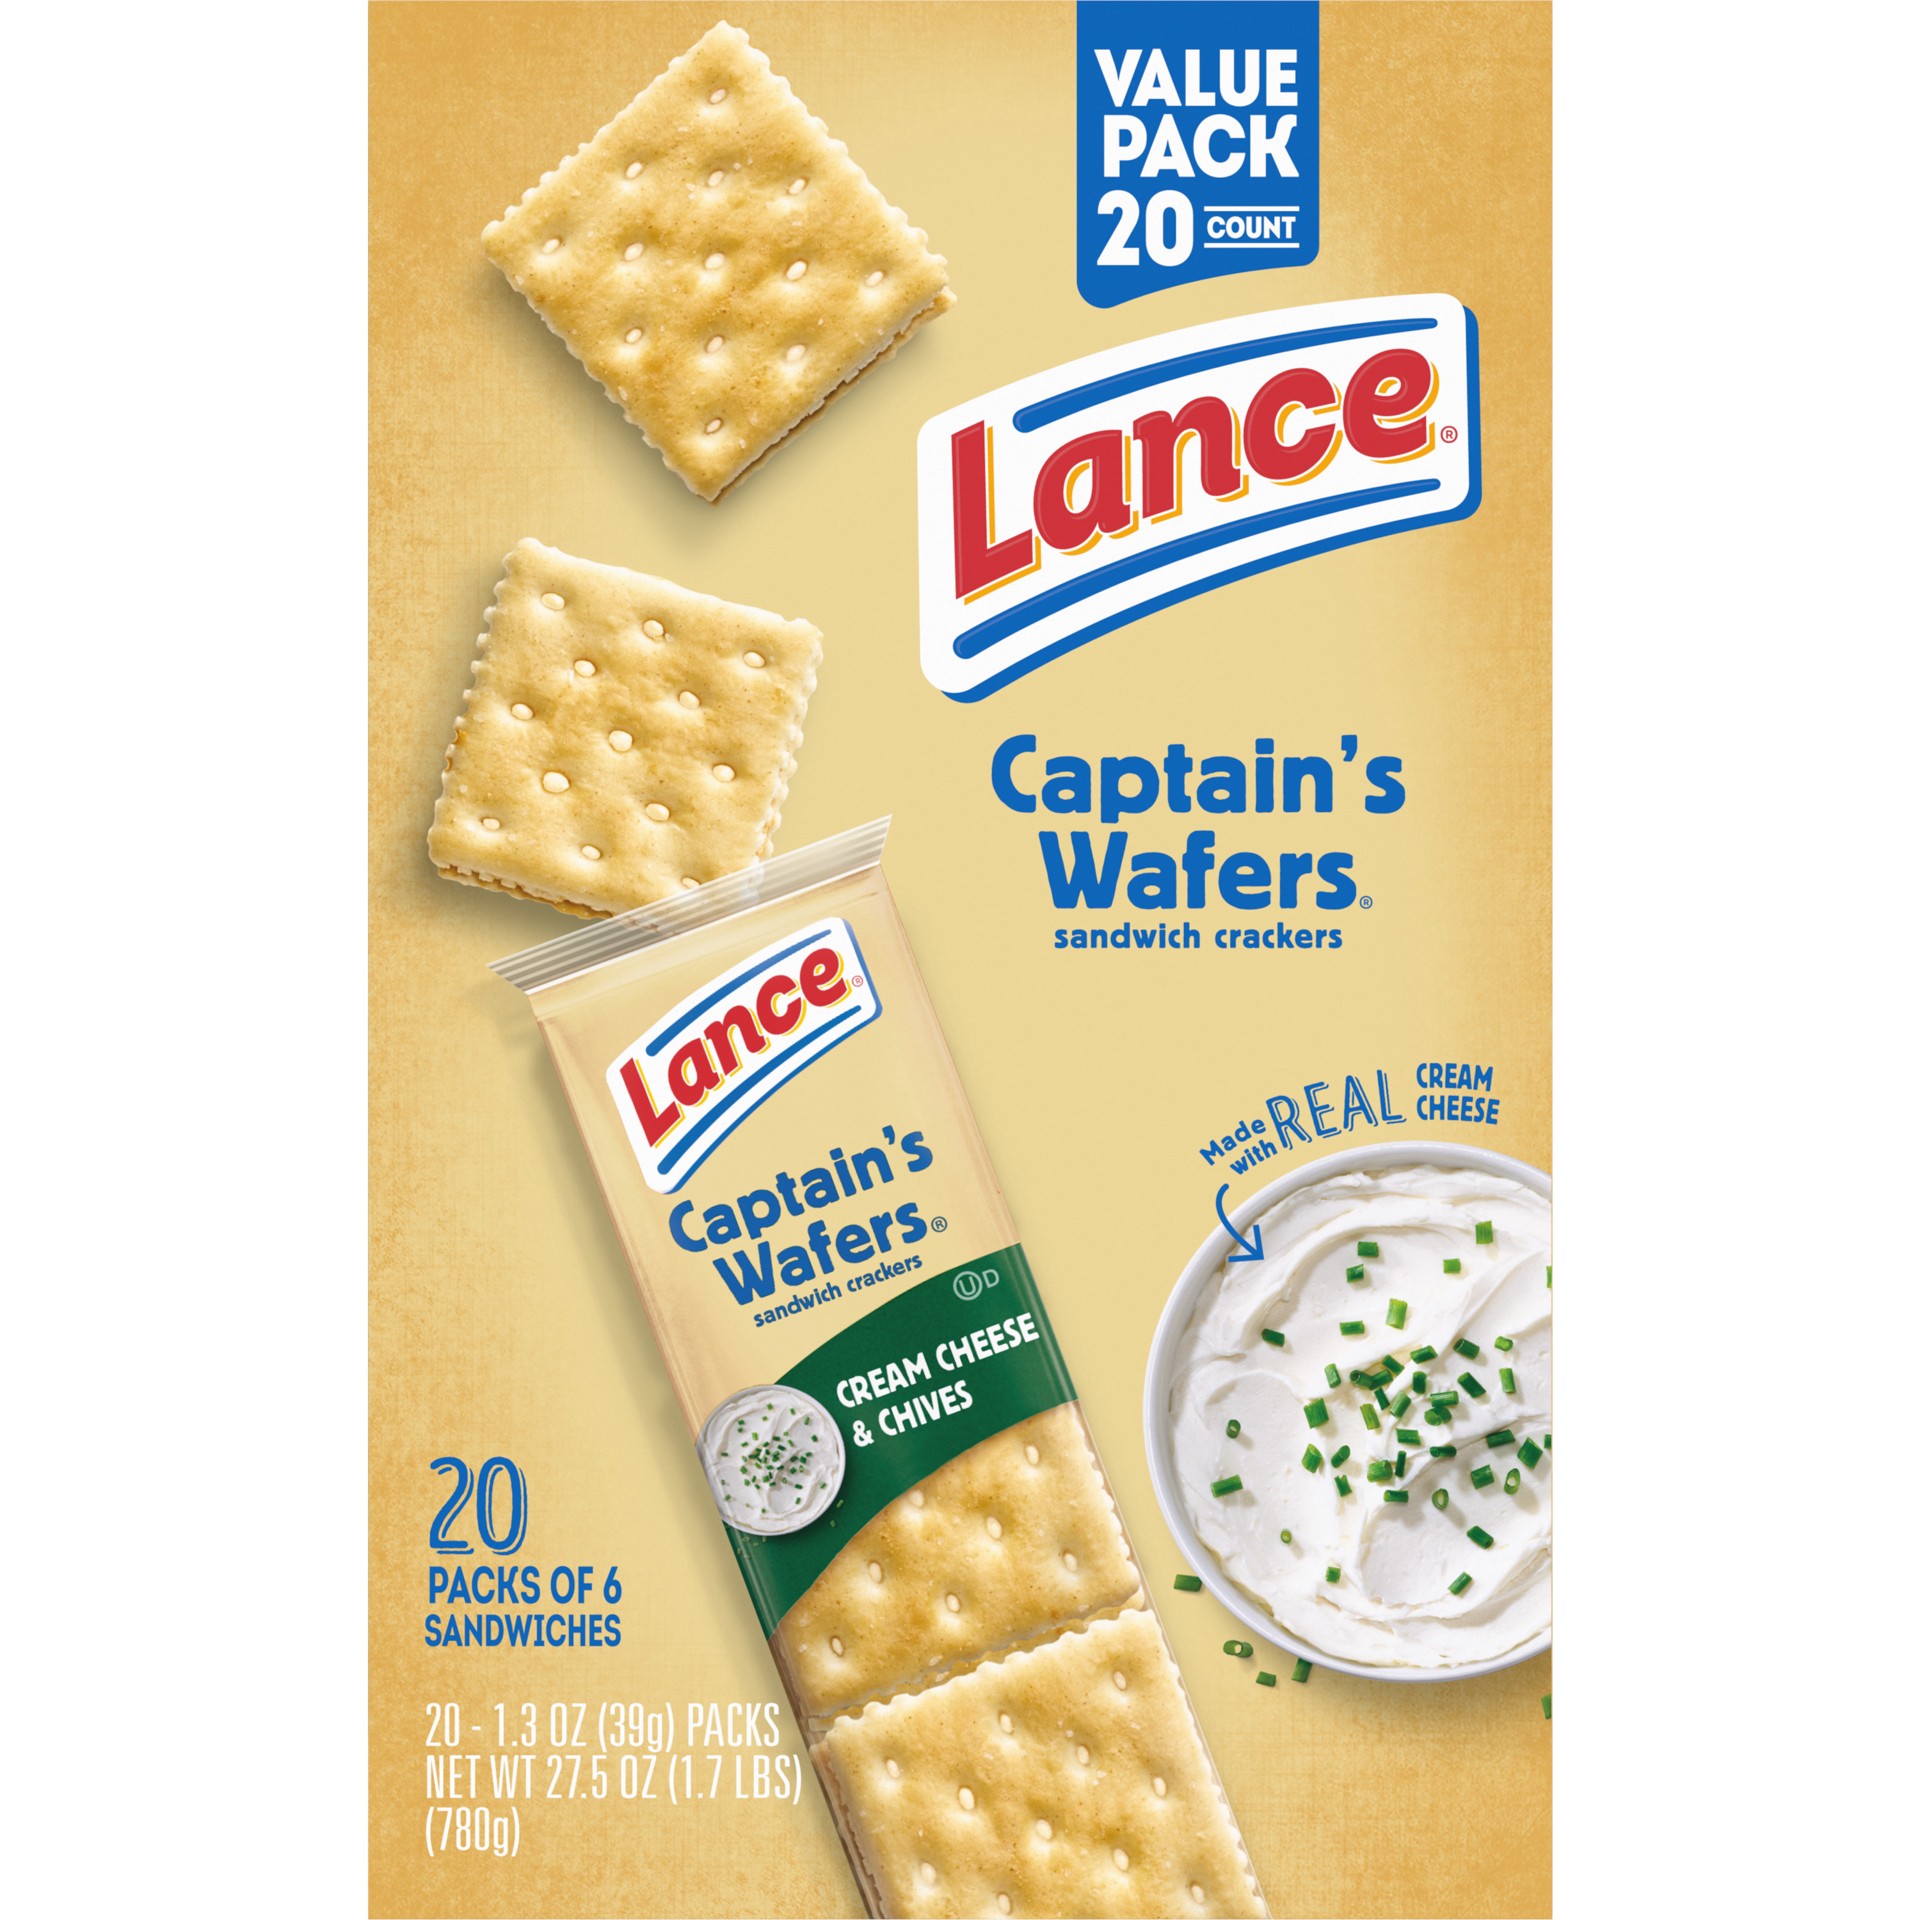 slide 6 of 10, Lance Sandwich Crackers, Captain's Wafers Cream Cheese and Chives, 20 Packs, 6 Sandwiches Each, 27.5 oz